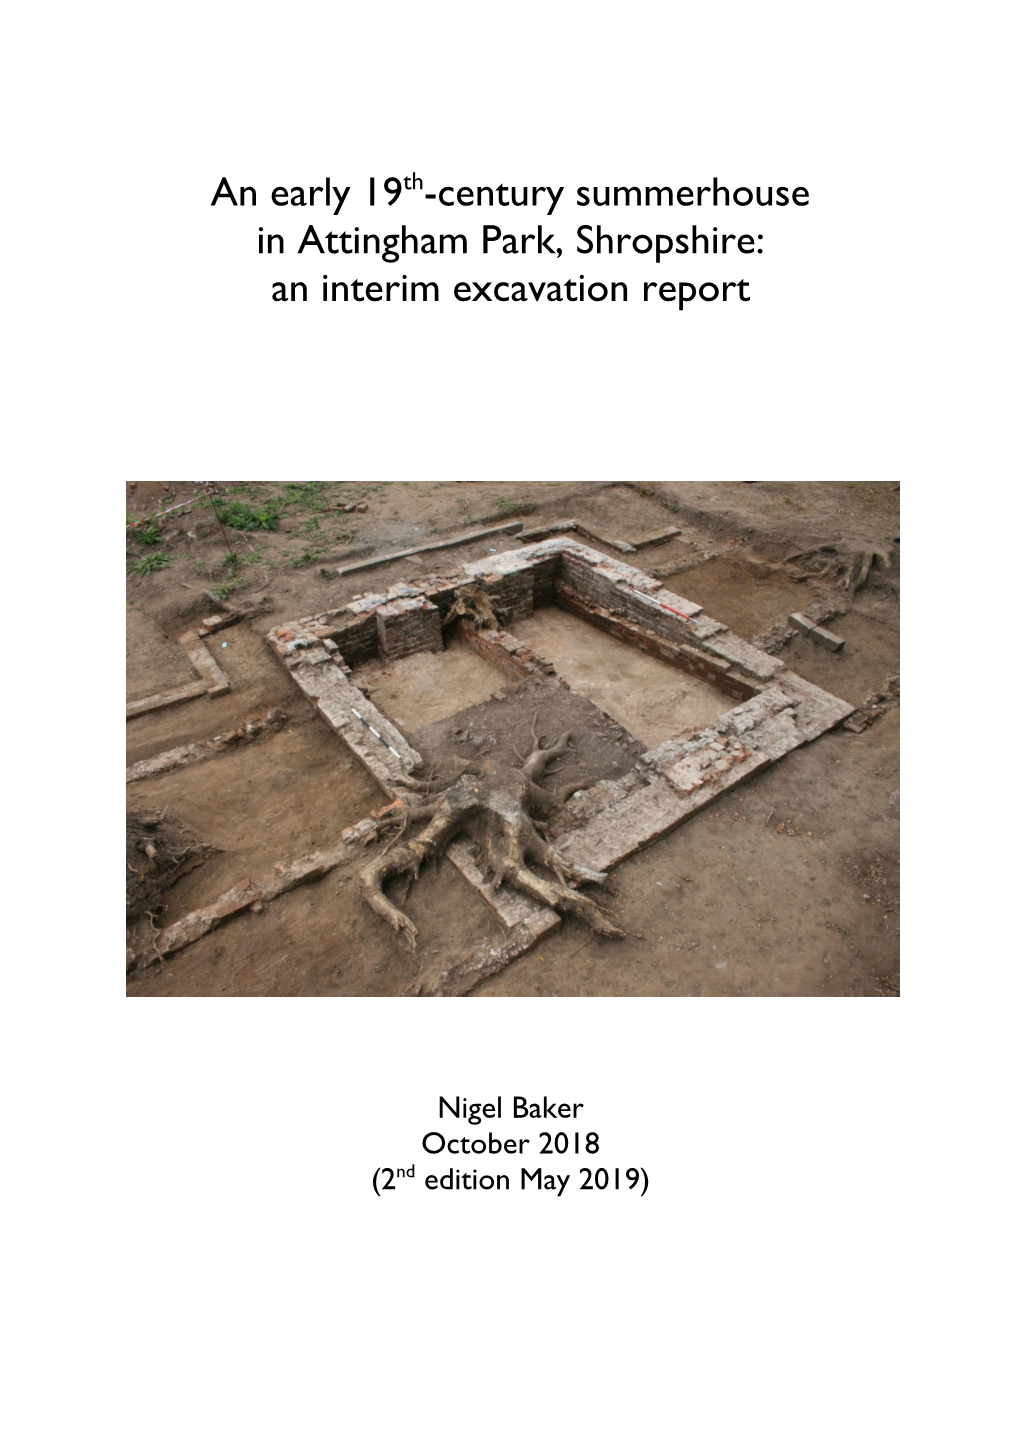 An Early 19Th-Century Summerhouse in Attingham Park, Shropshire: an Interim Excavation Report